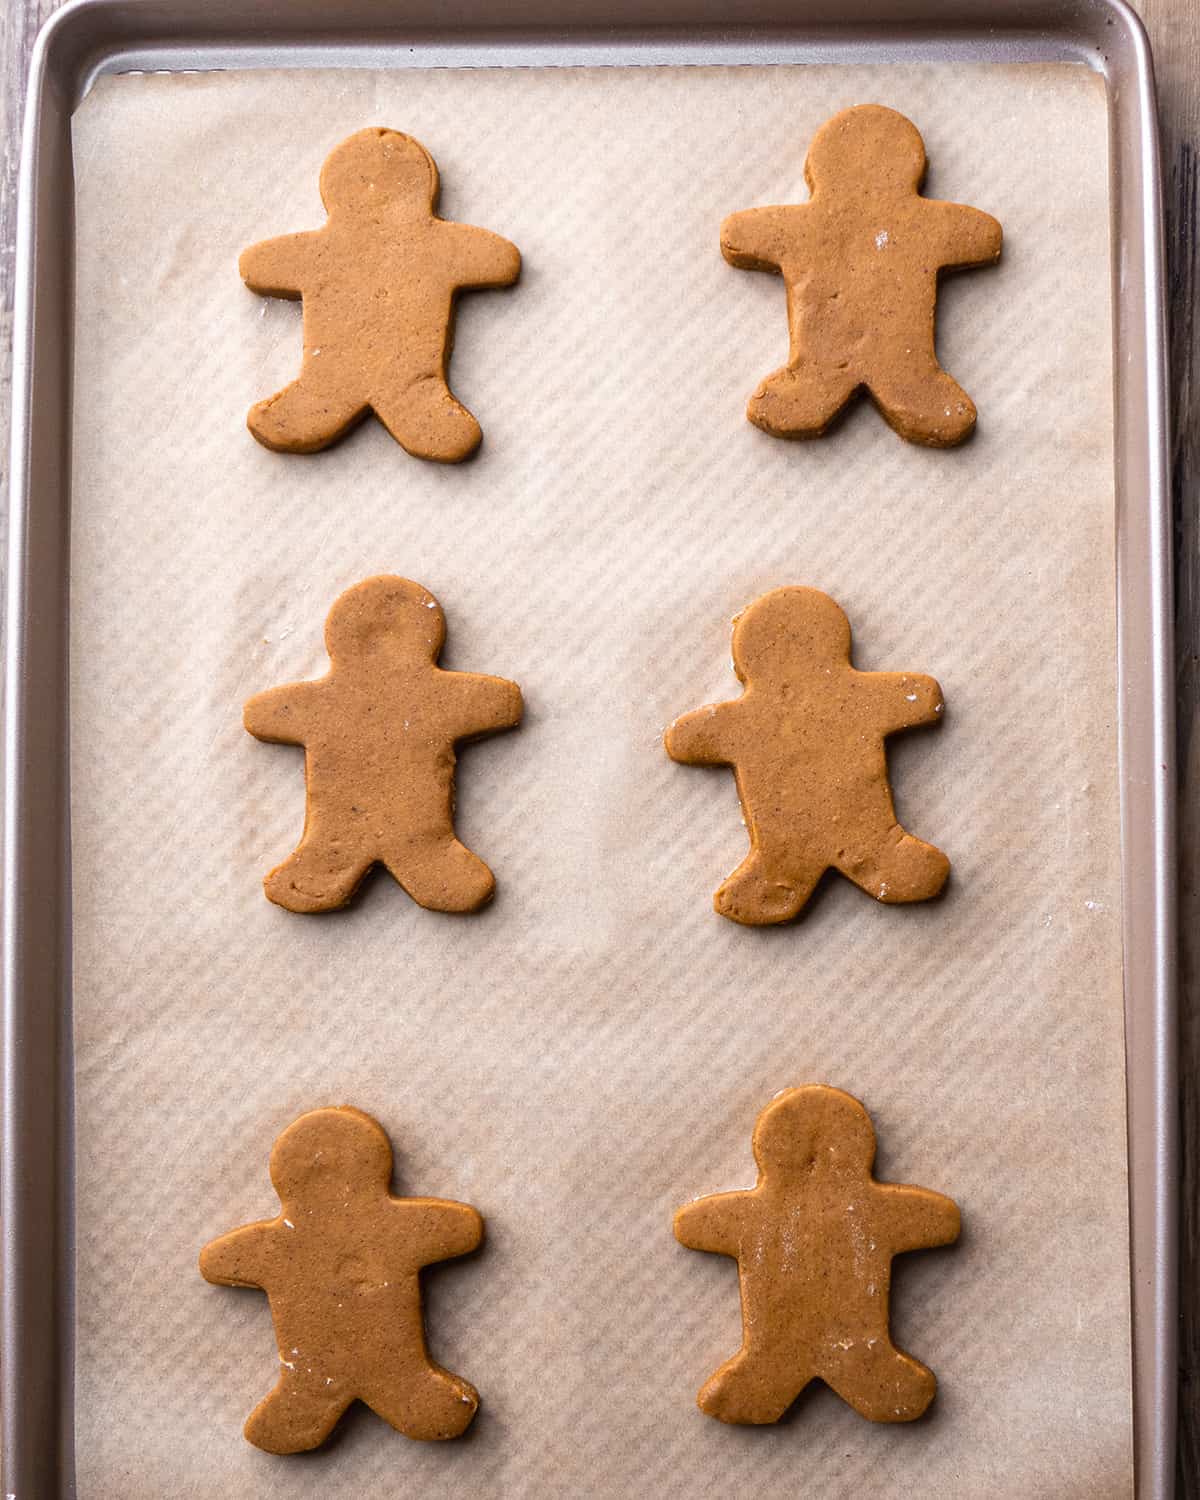 How to Make Gingerbread Men - cut out gingerbread men on a baking sheet before baking